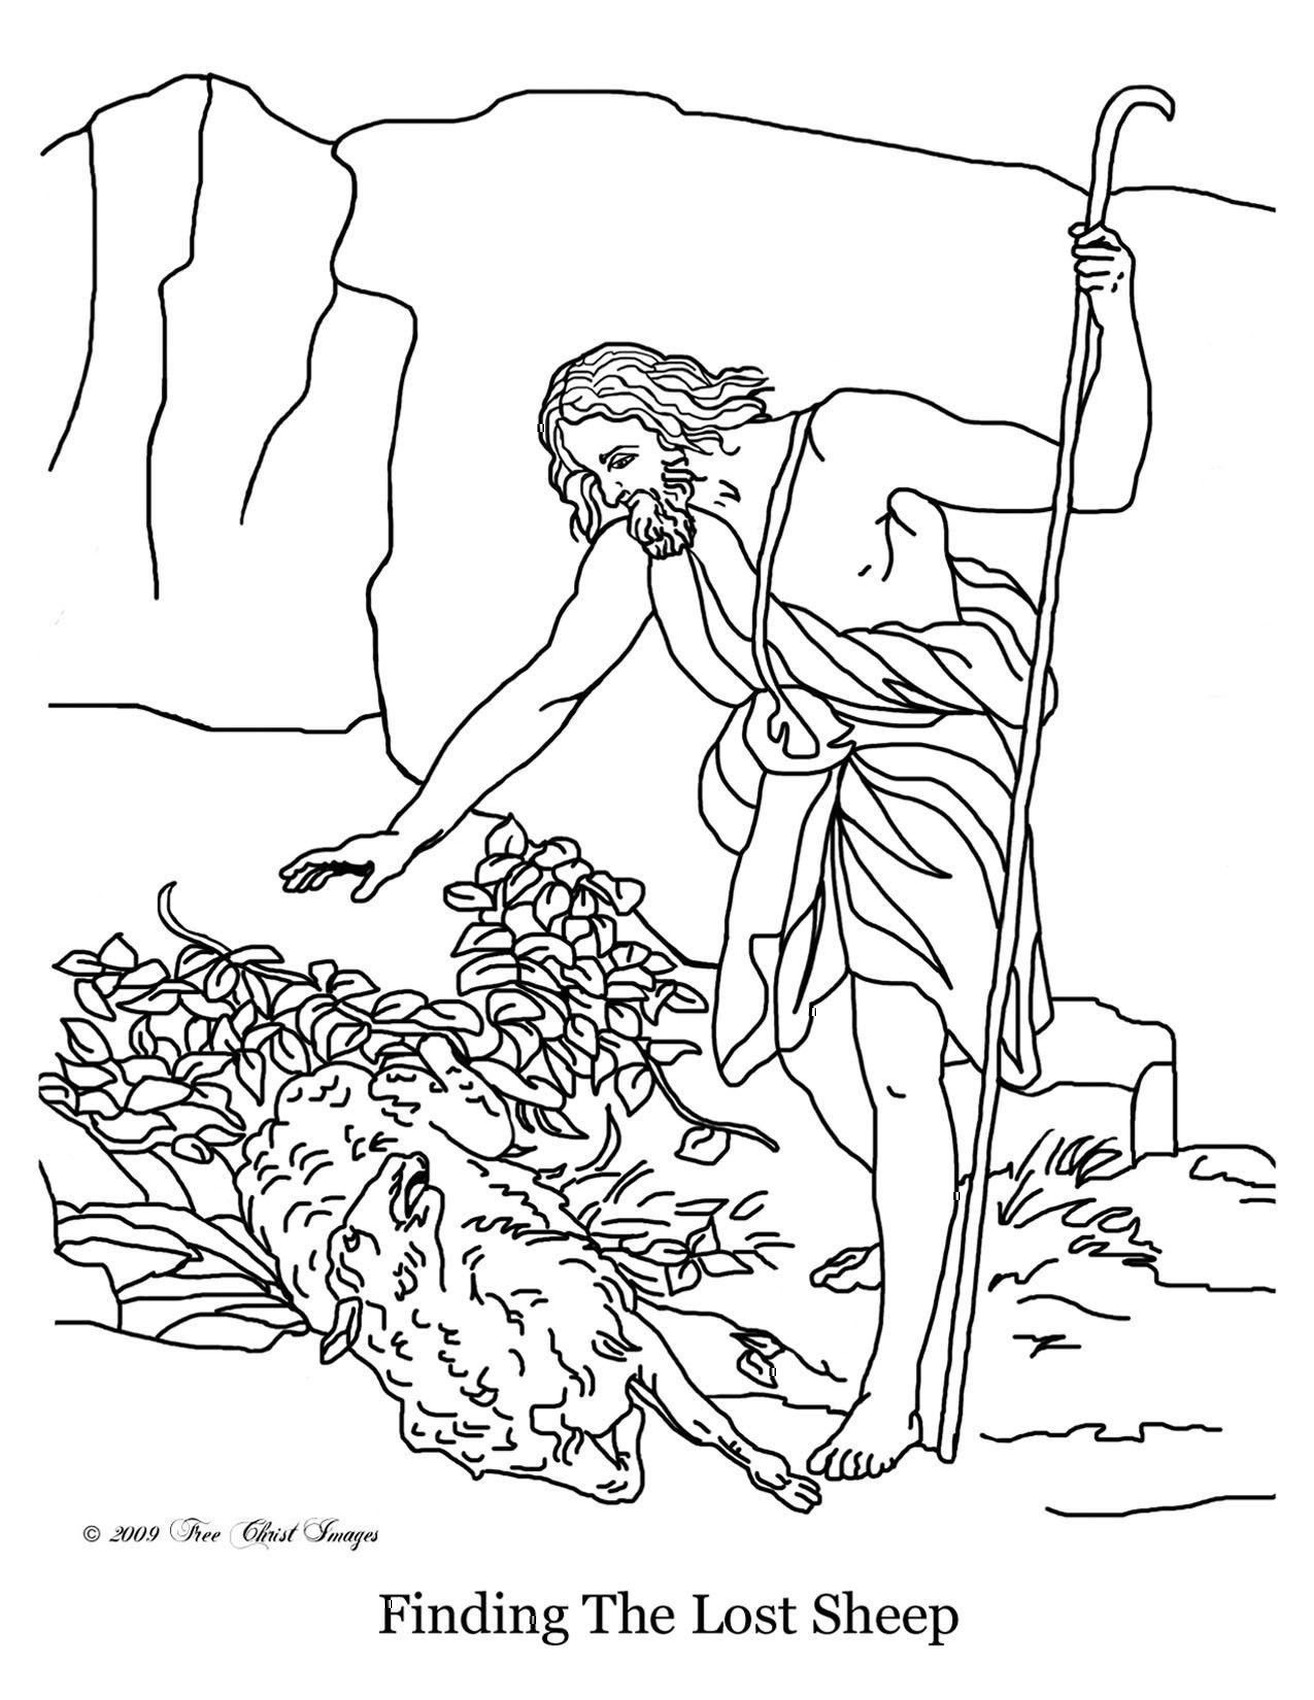 Download Free Bible Coloring Book Pages, Printable Bible Coloring Page